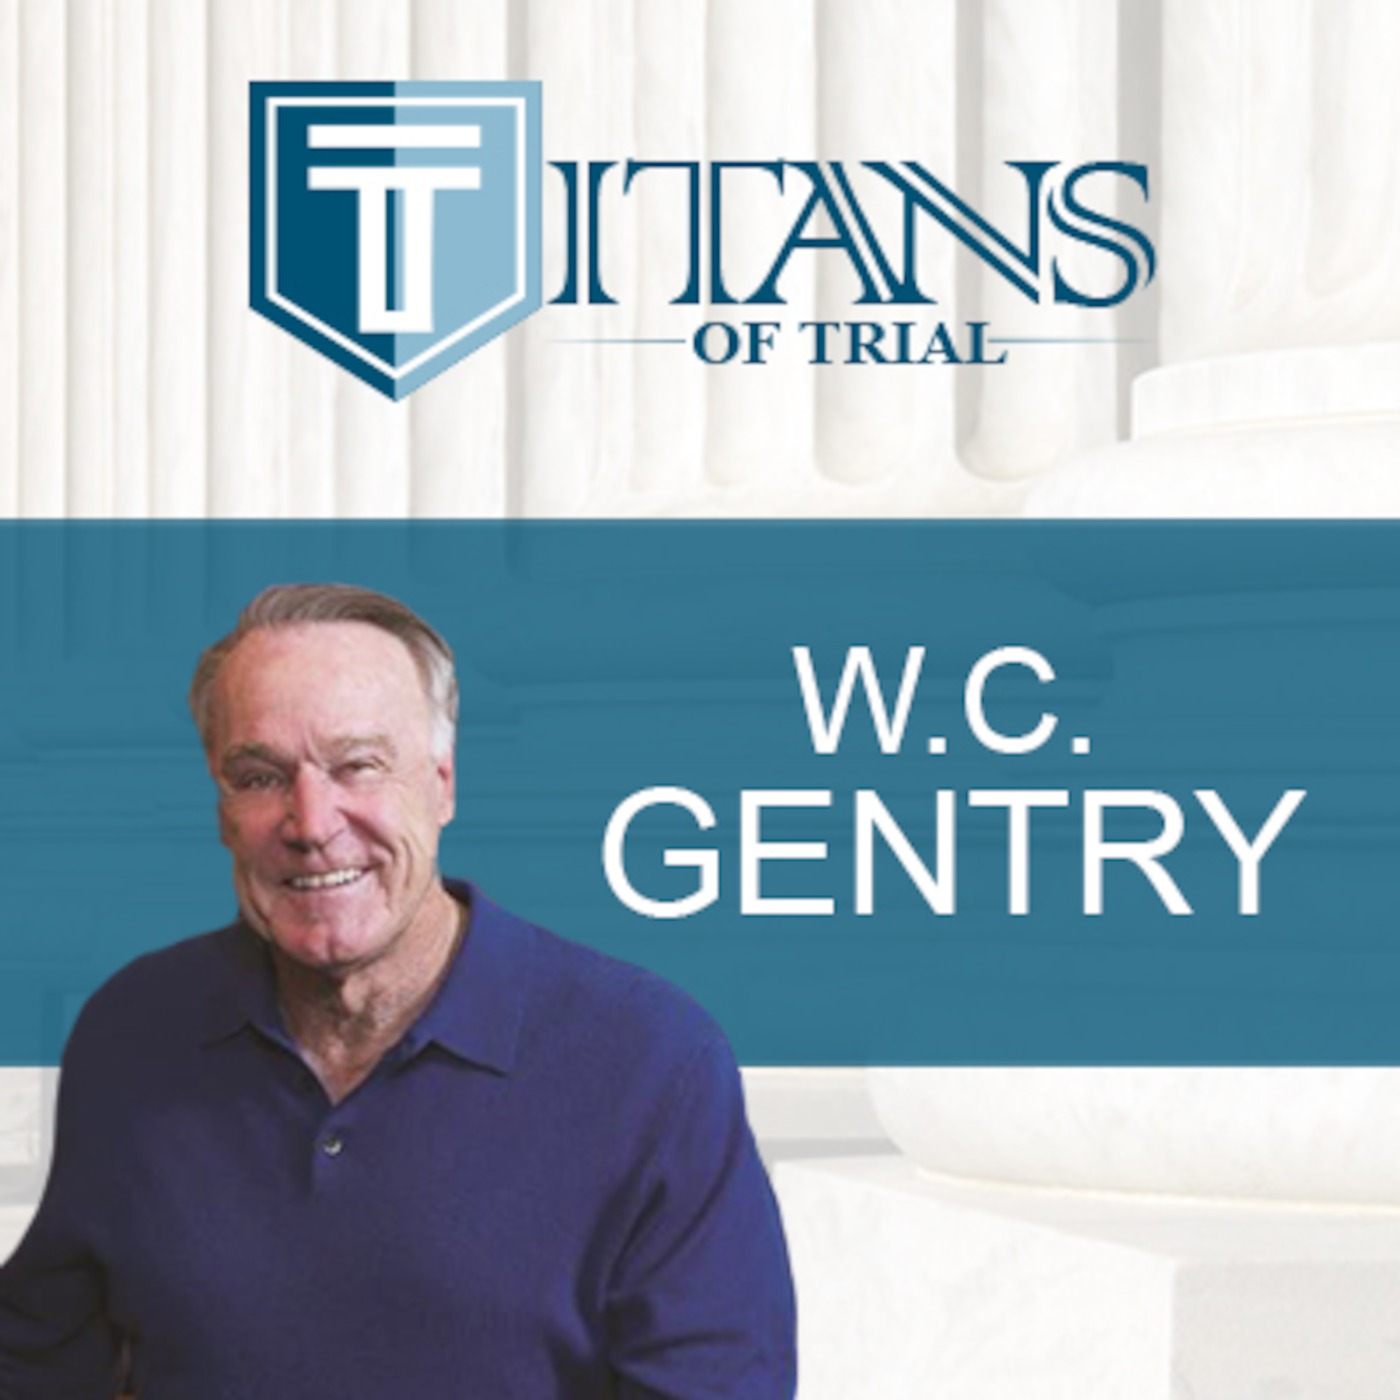 Titans of Trial - W.C. Gentry